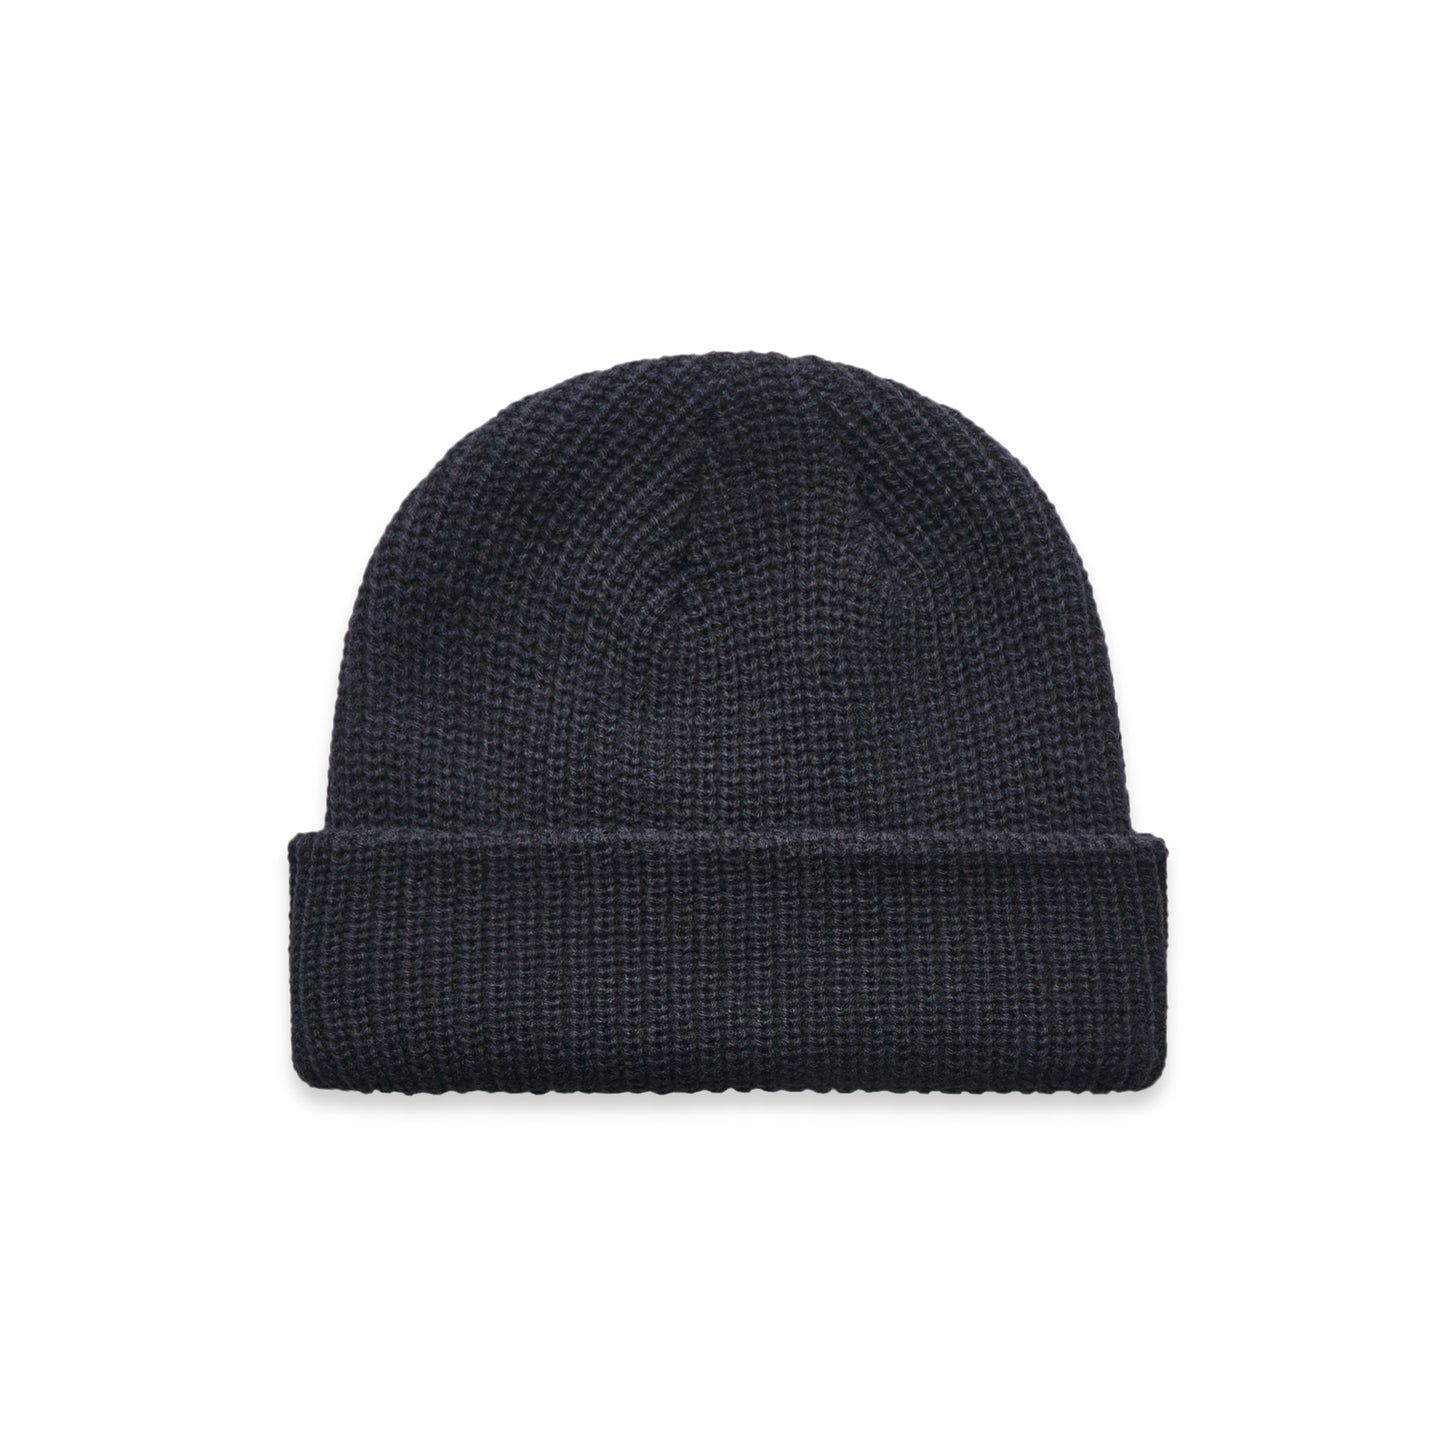 CABLE BEANIE - 1120